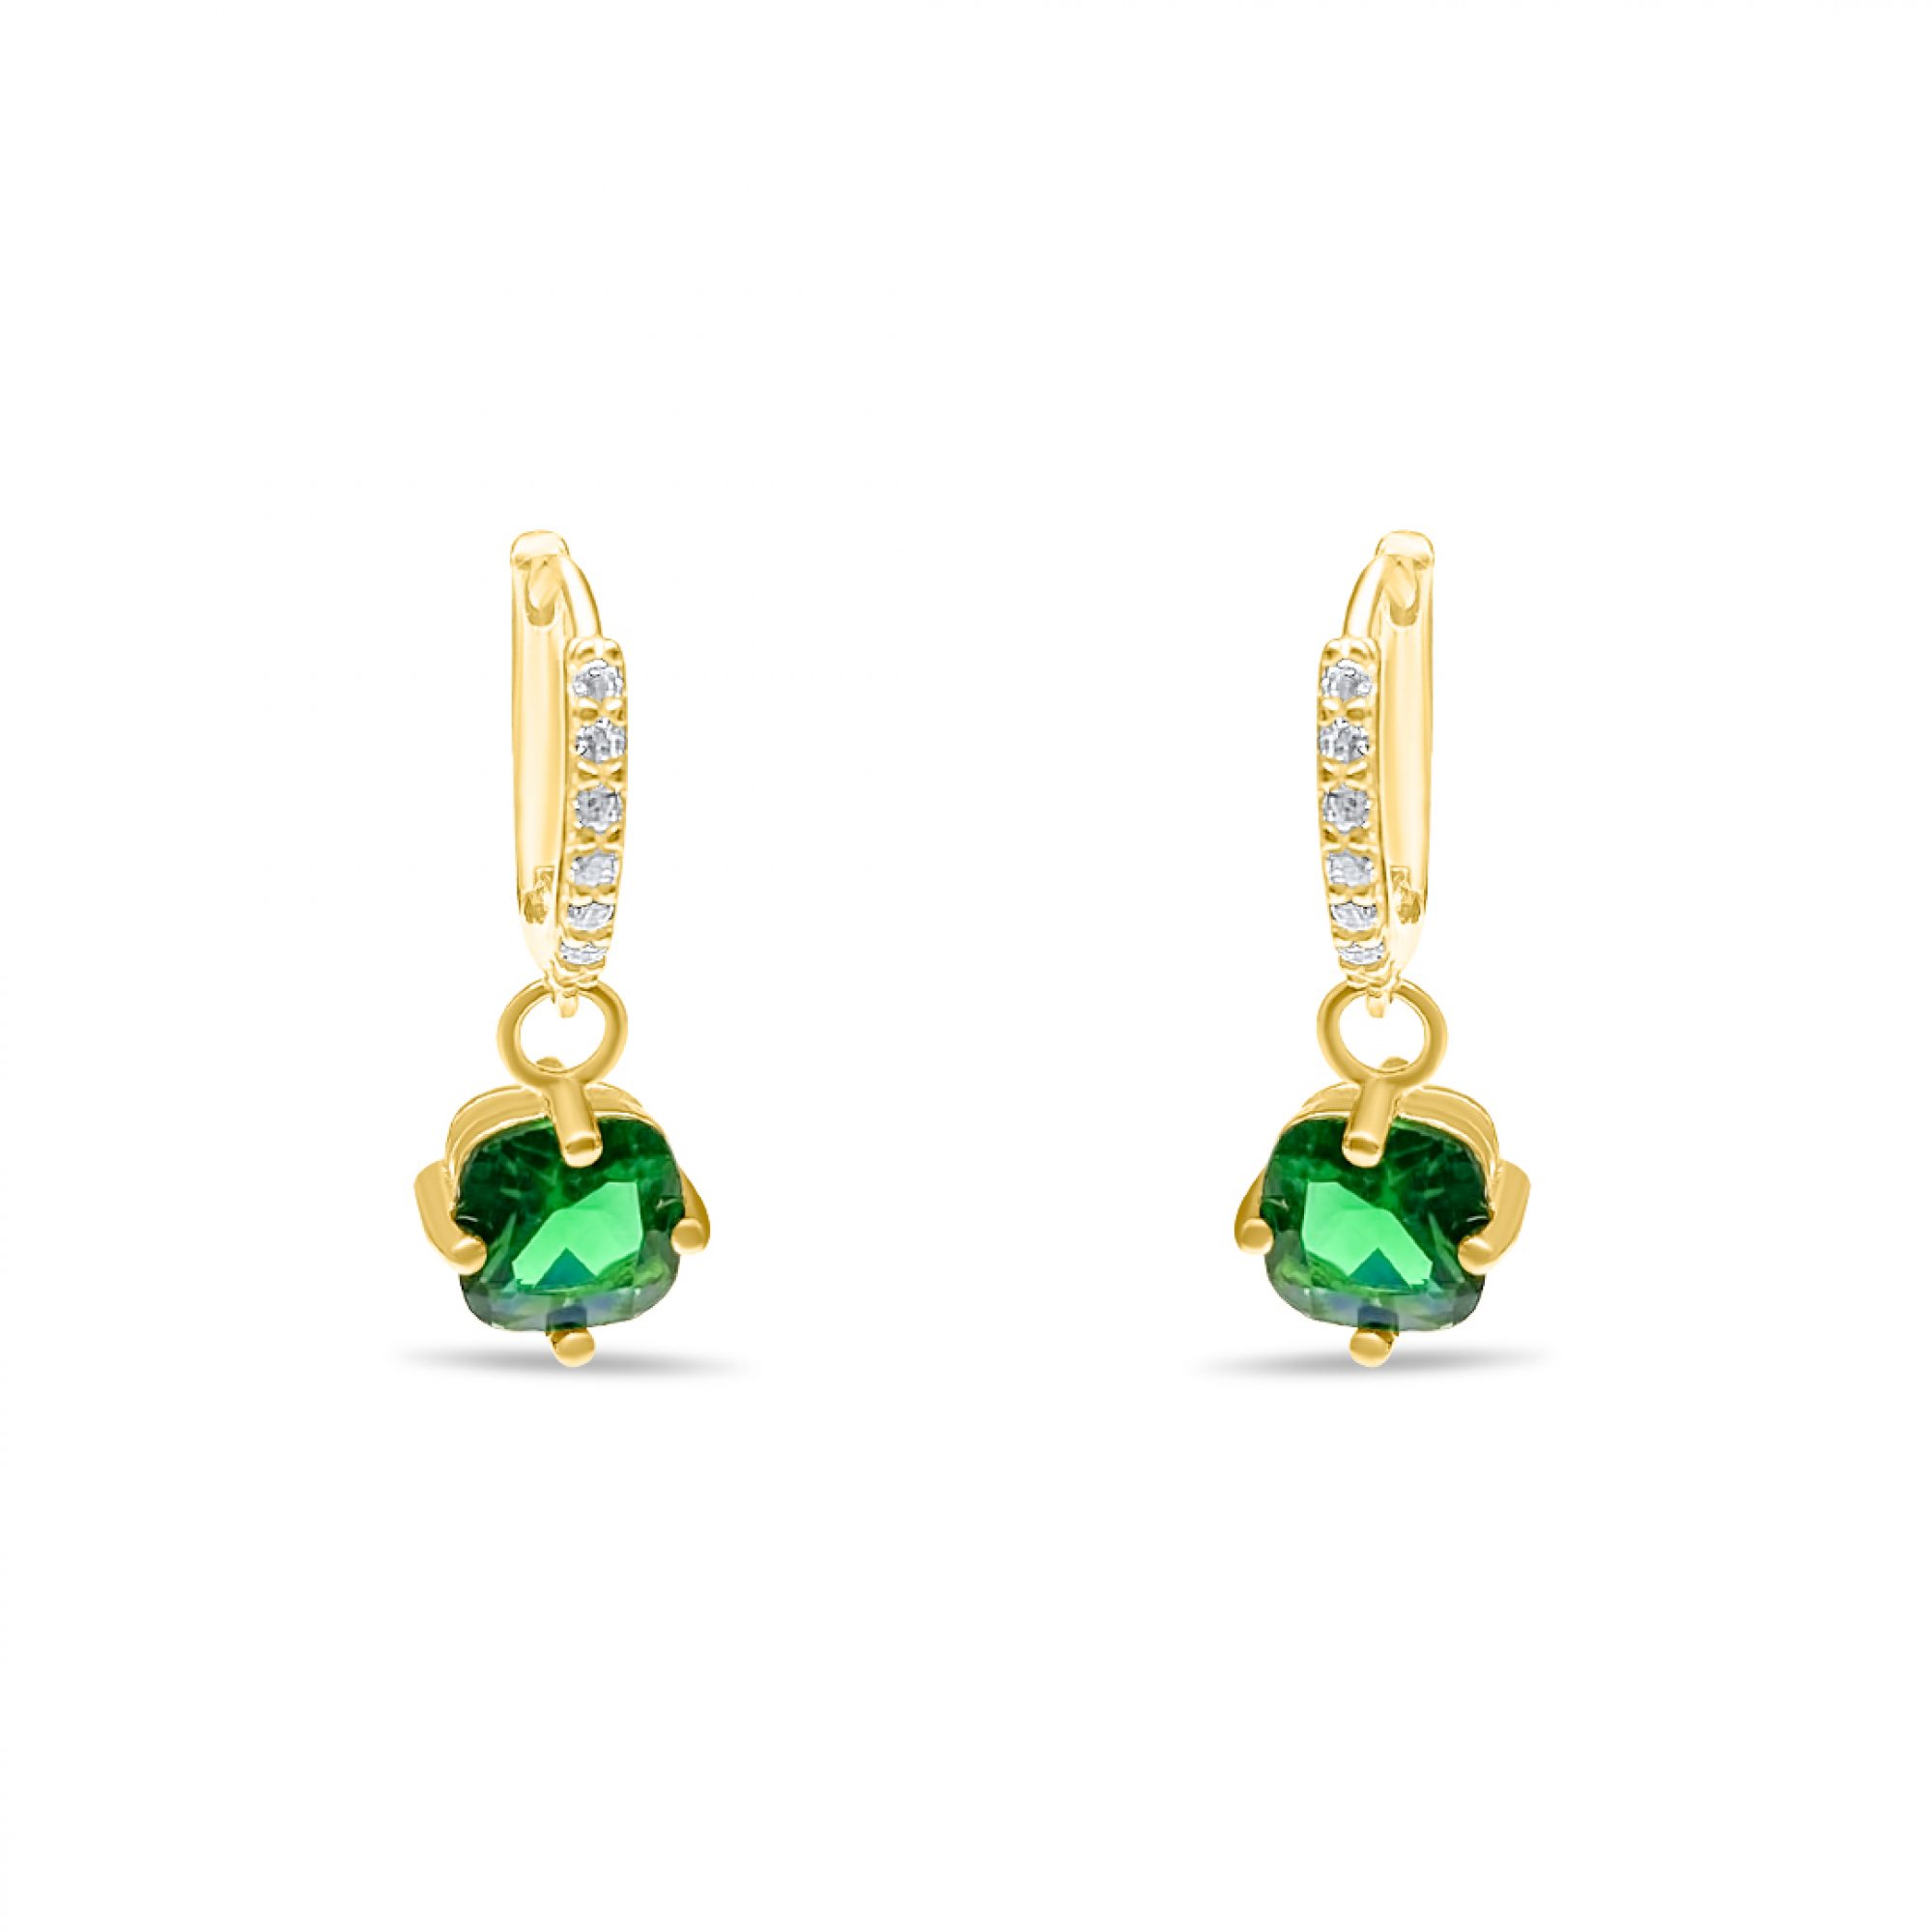 Gold plated earrings with emerald and zircon stones